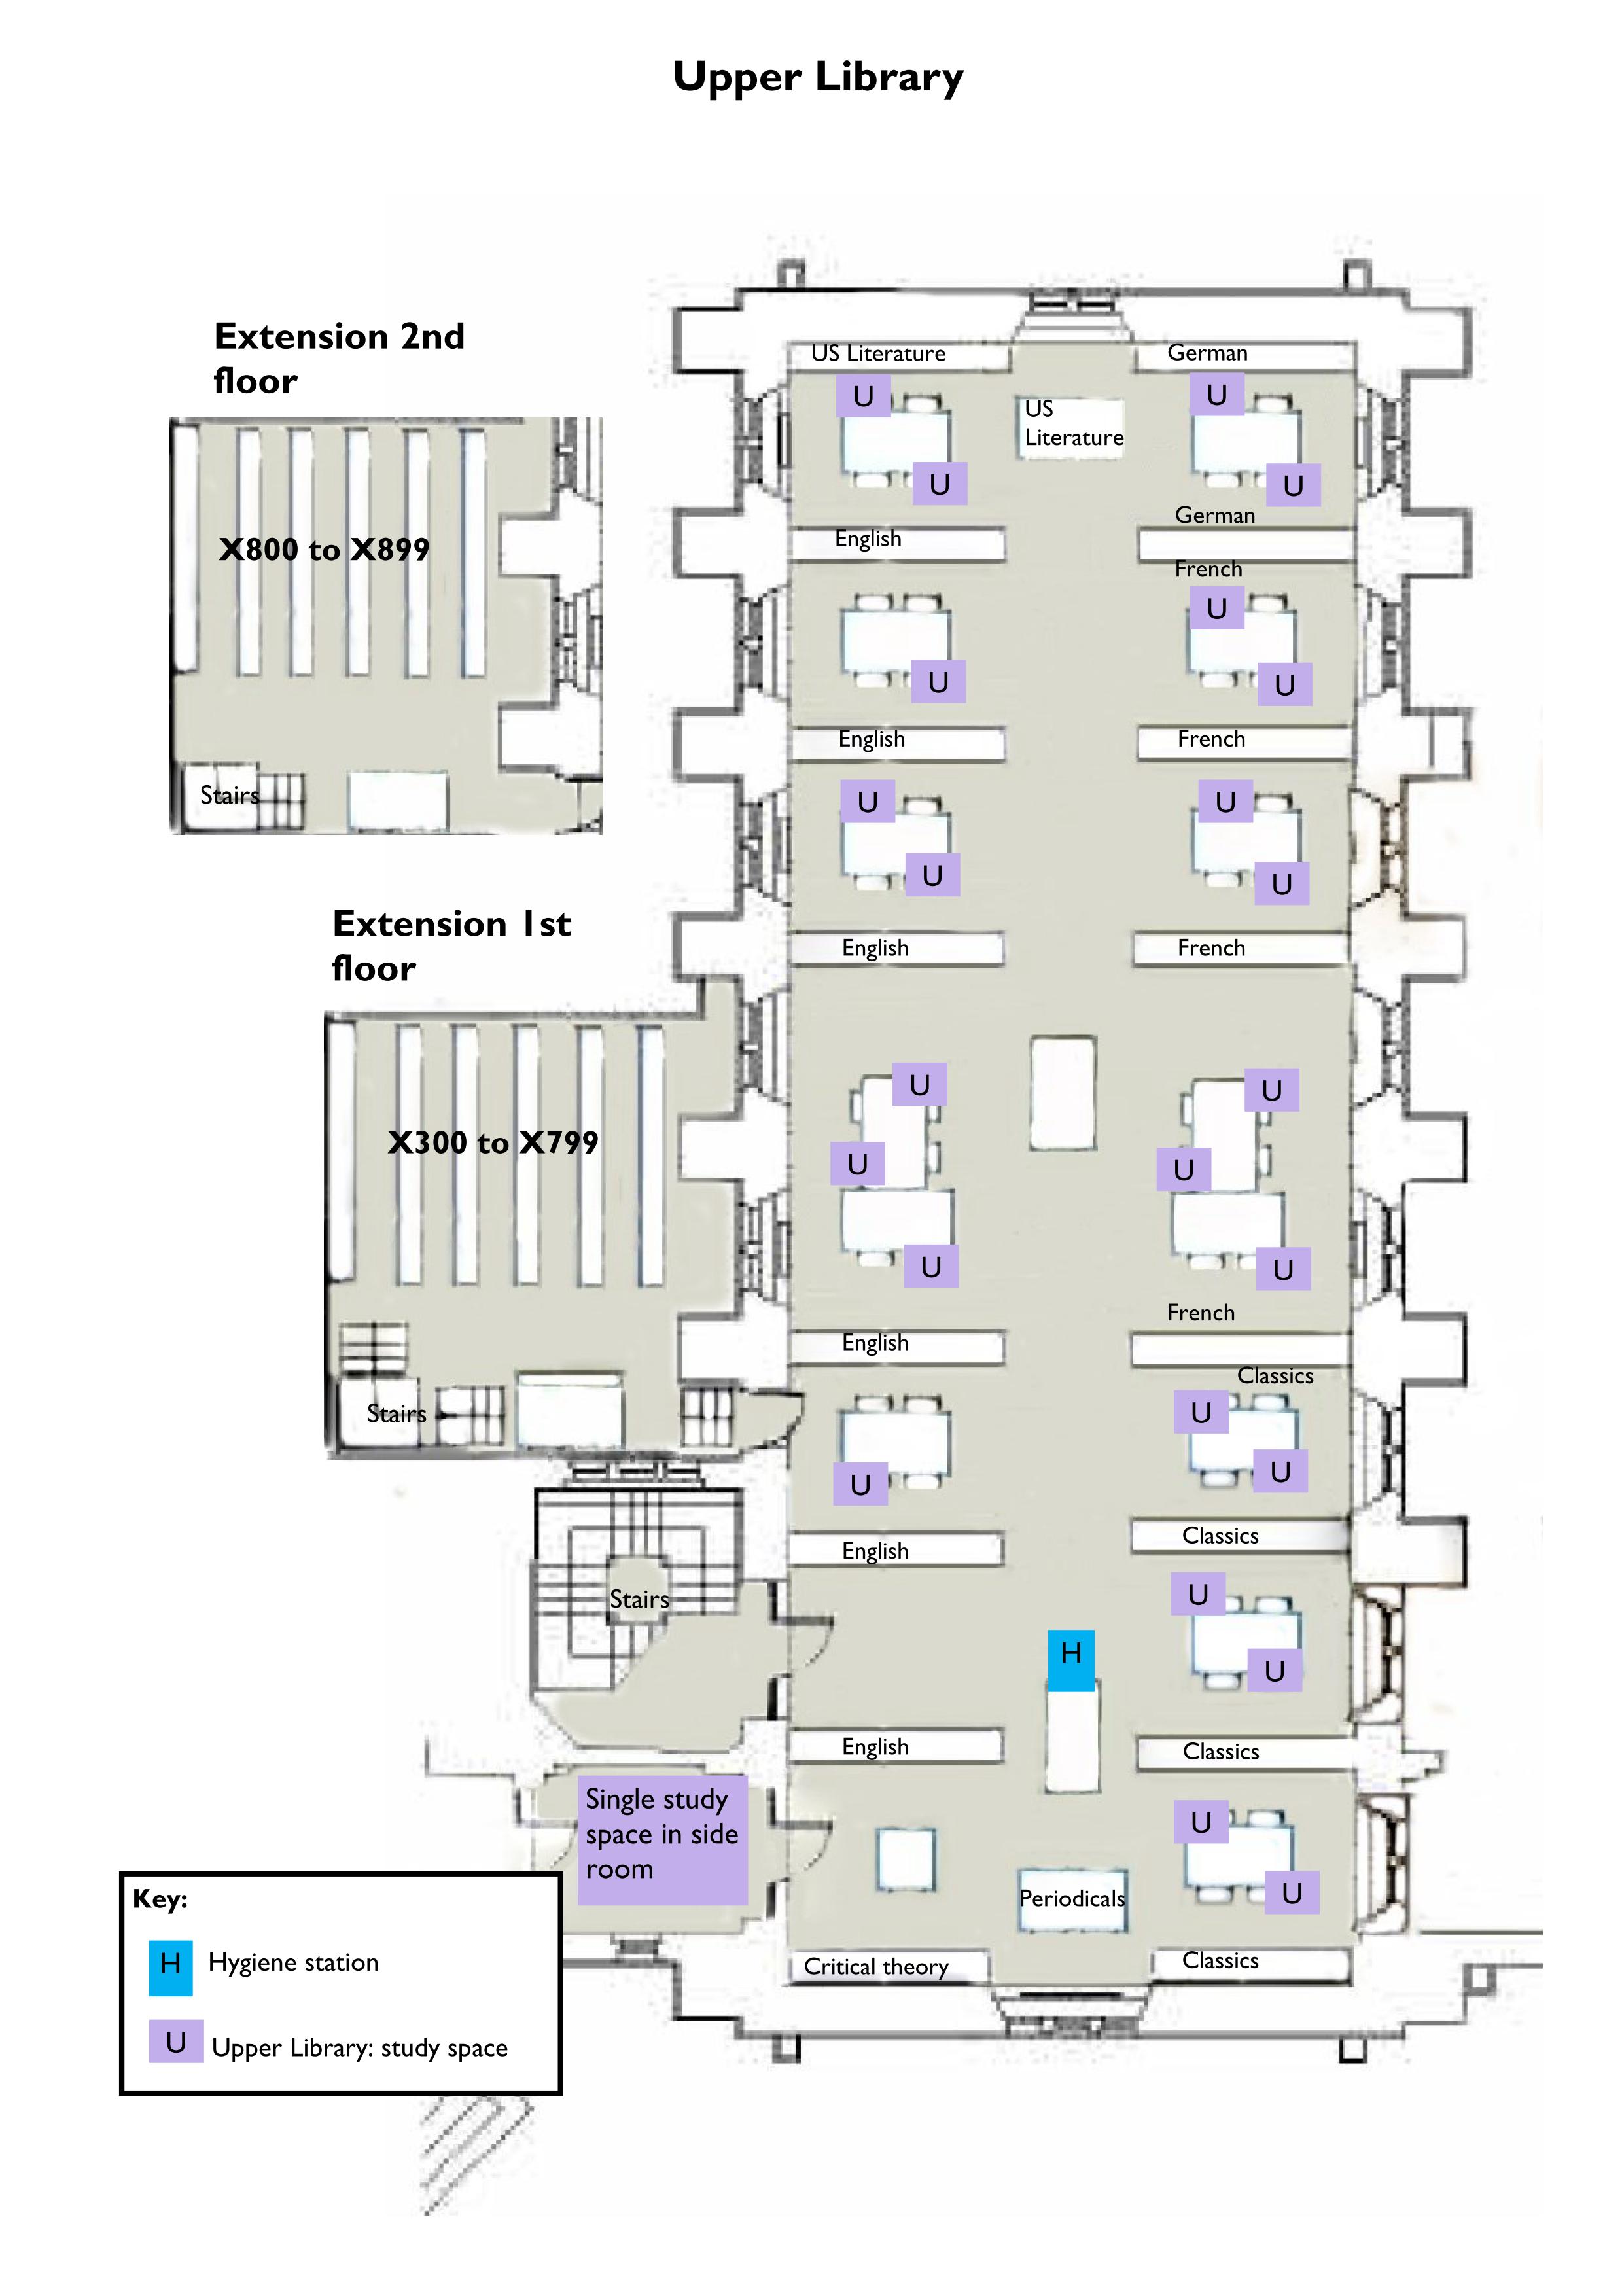 Floor plan of the Upper Library showing study spaces